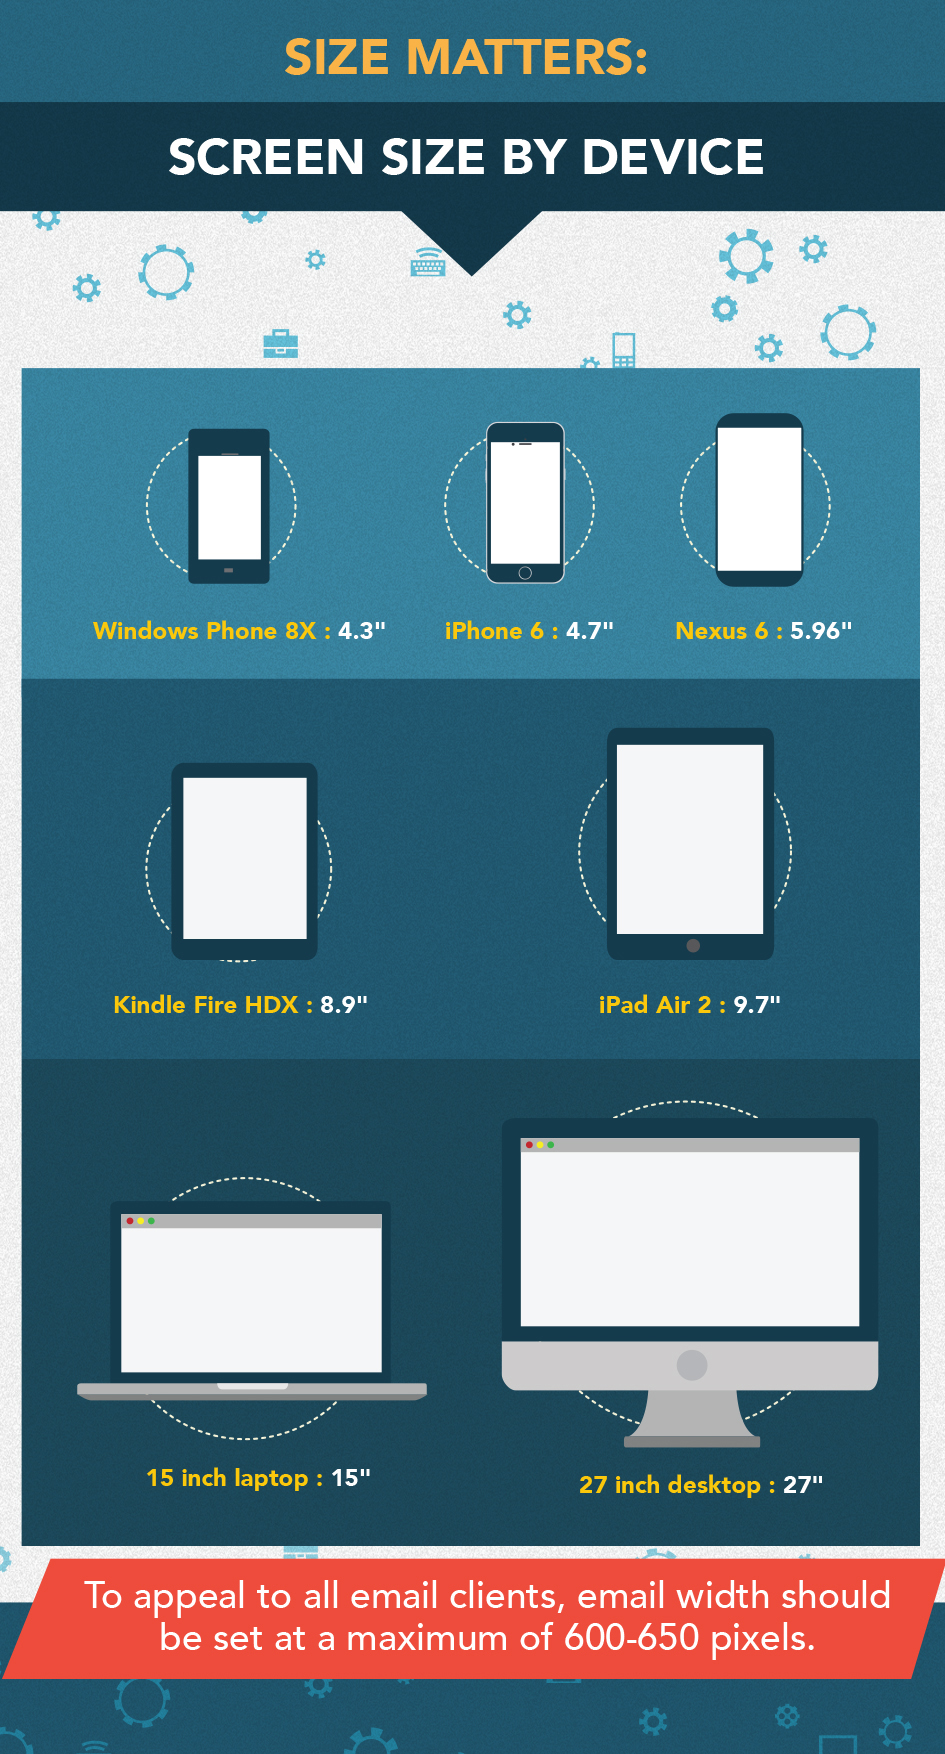 Size Matters: Screen Size By Device